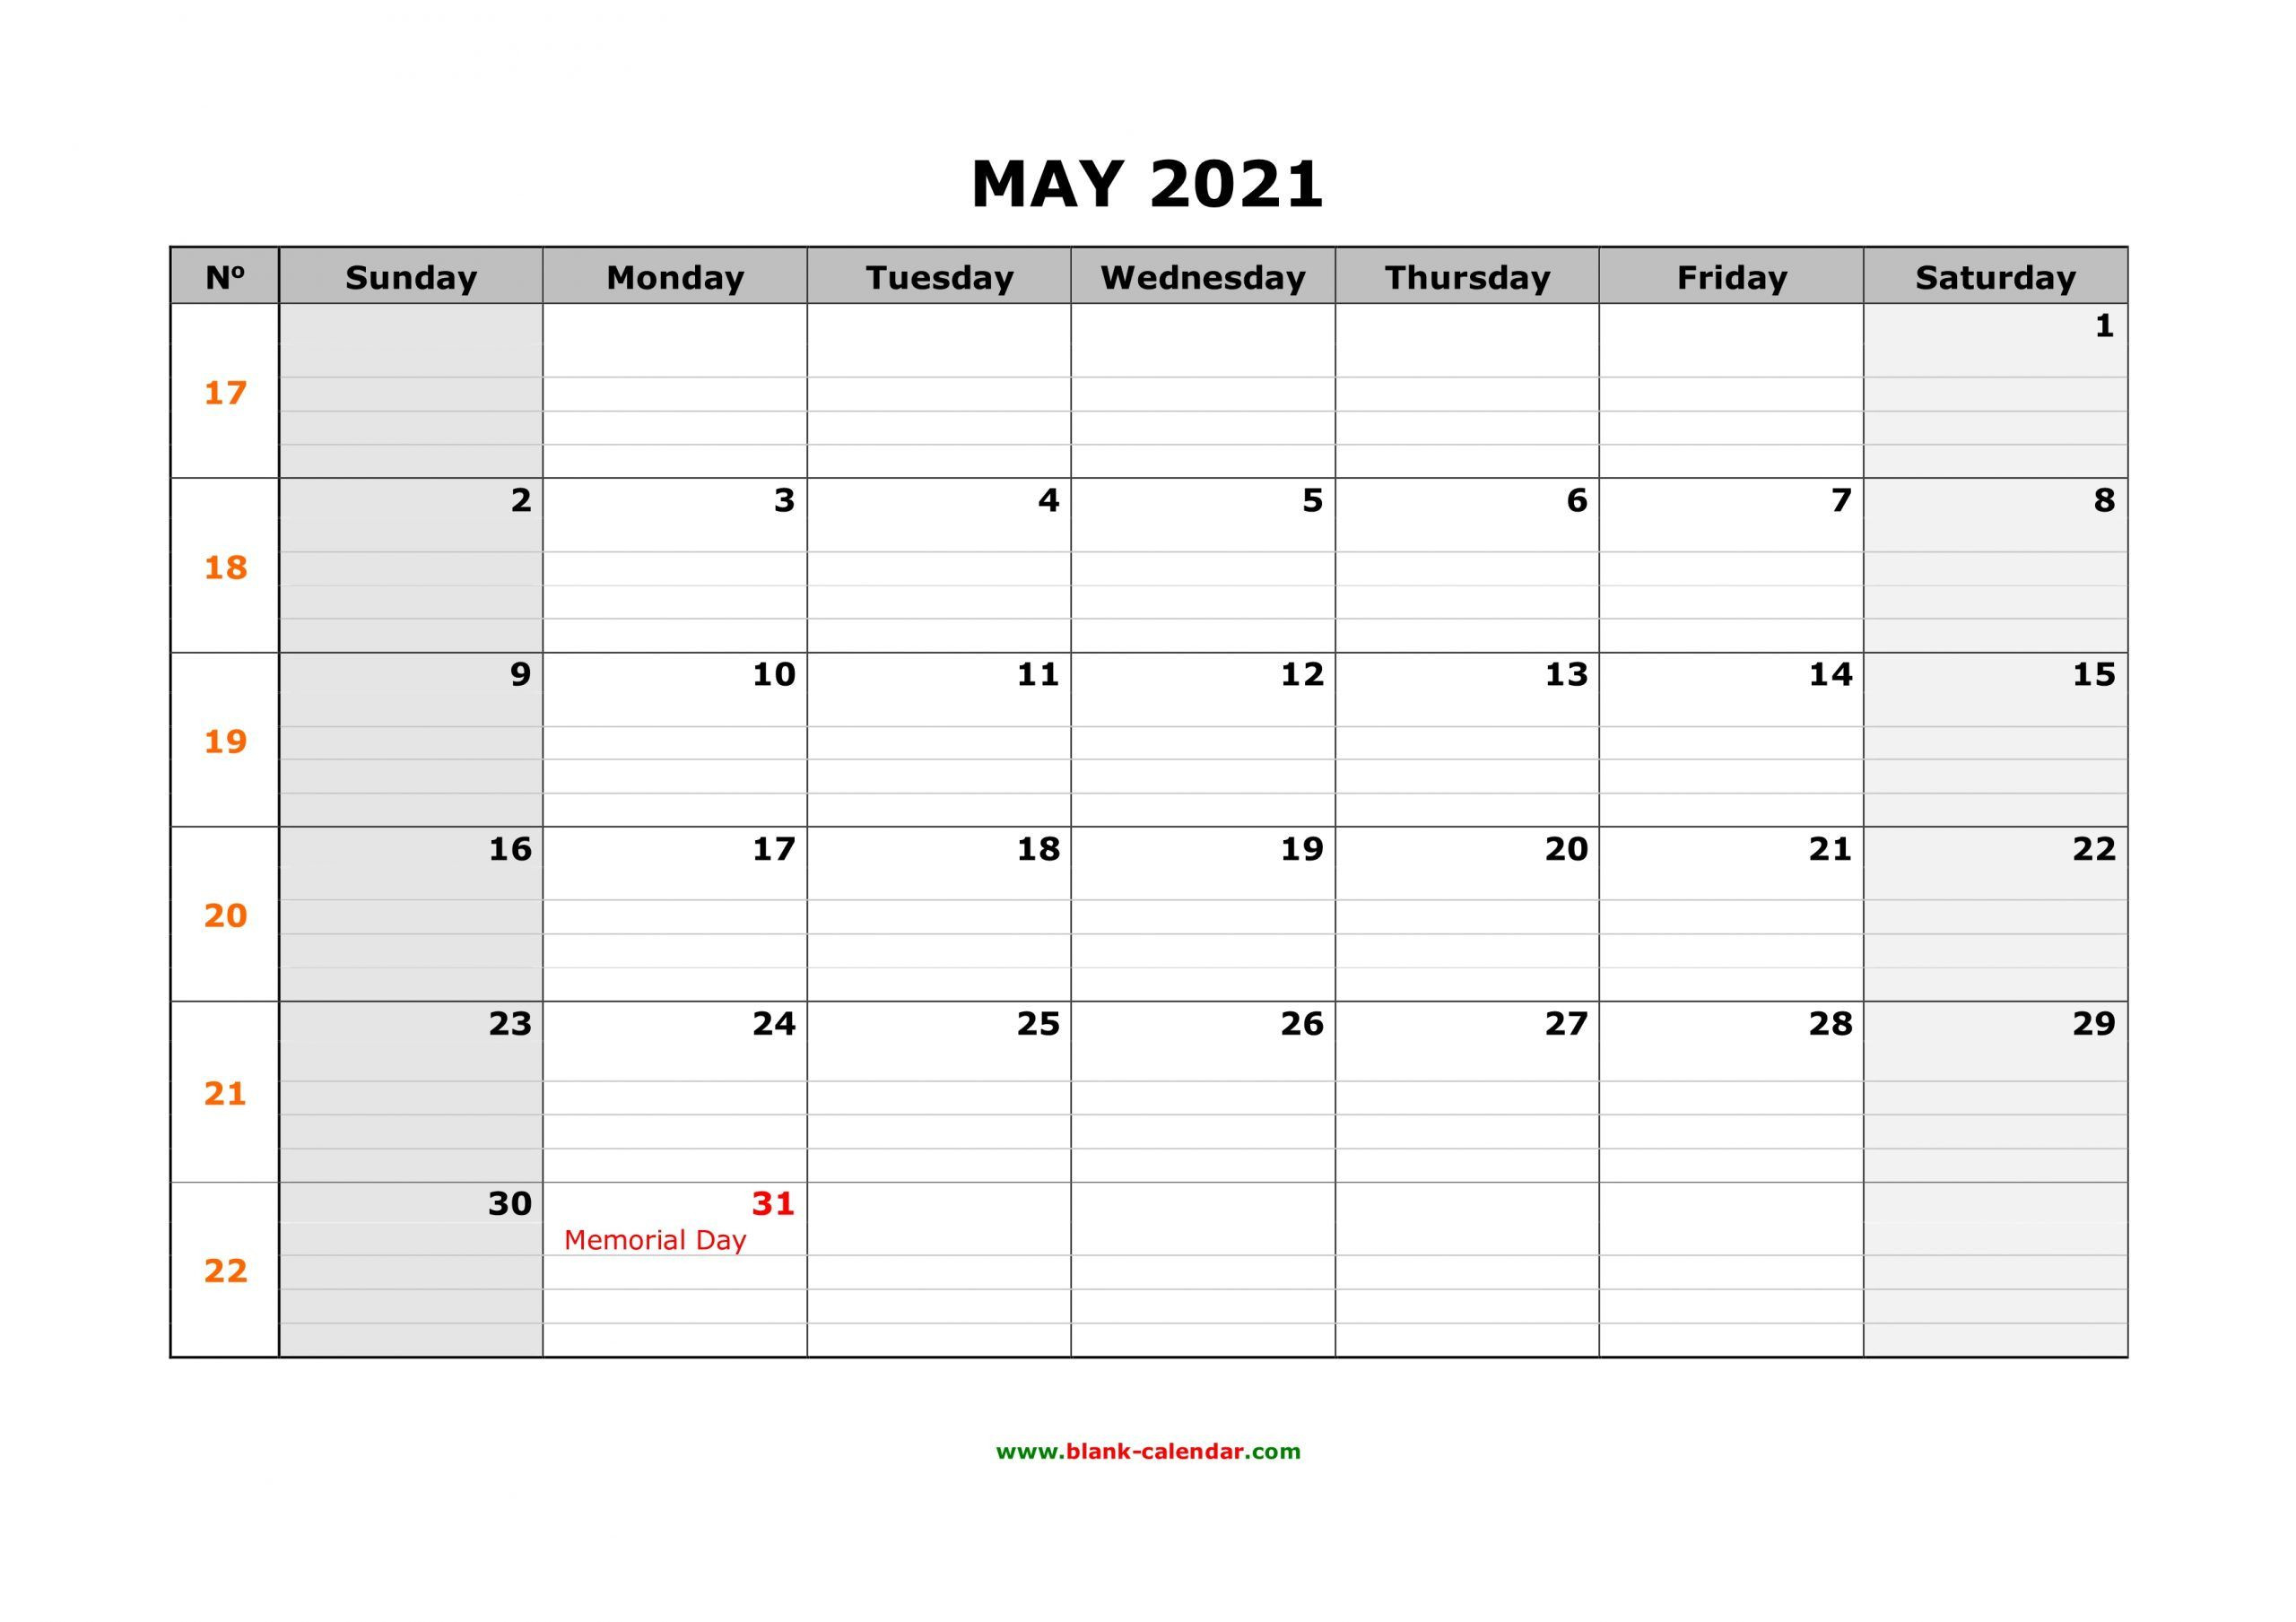 Calendars Printable 2021 Free With Grid Lines | Calendar  Free Printable Calendar With Grid Lines 2022